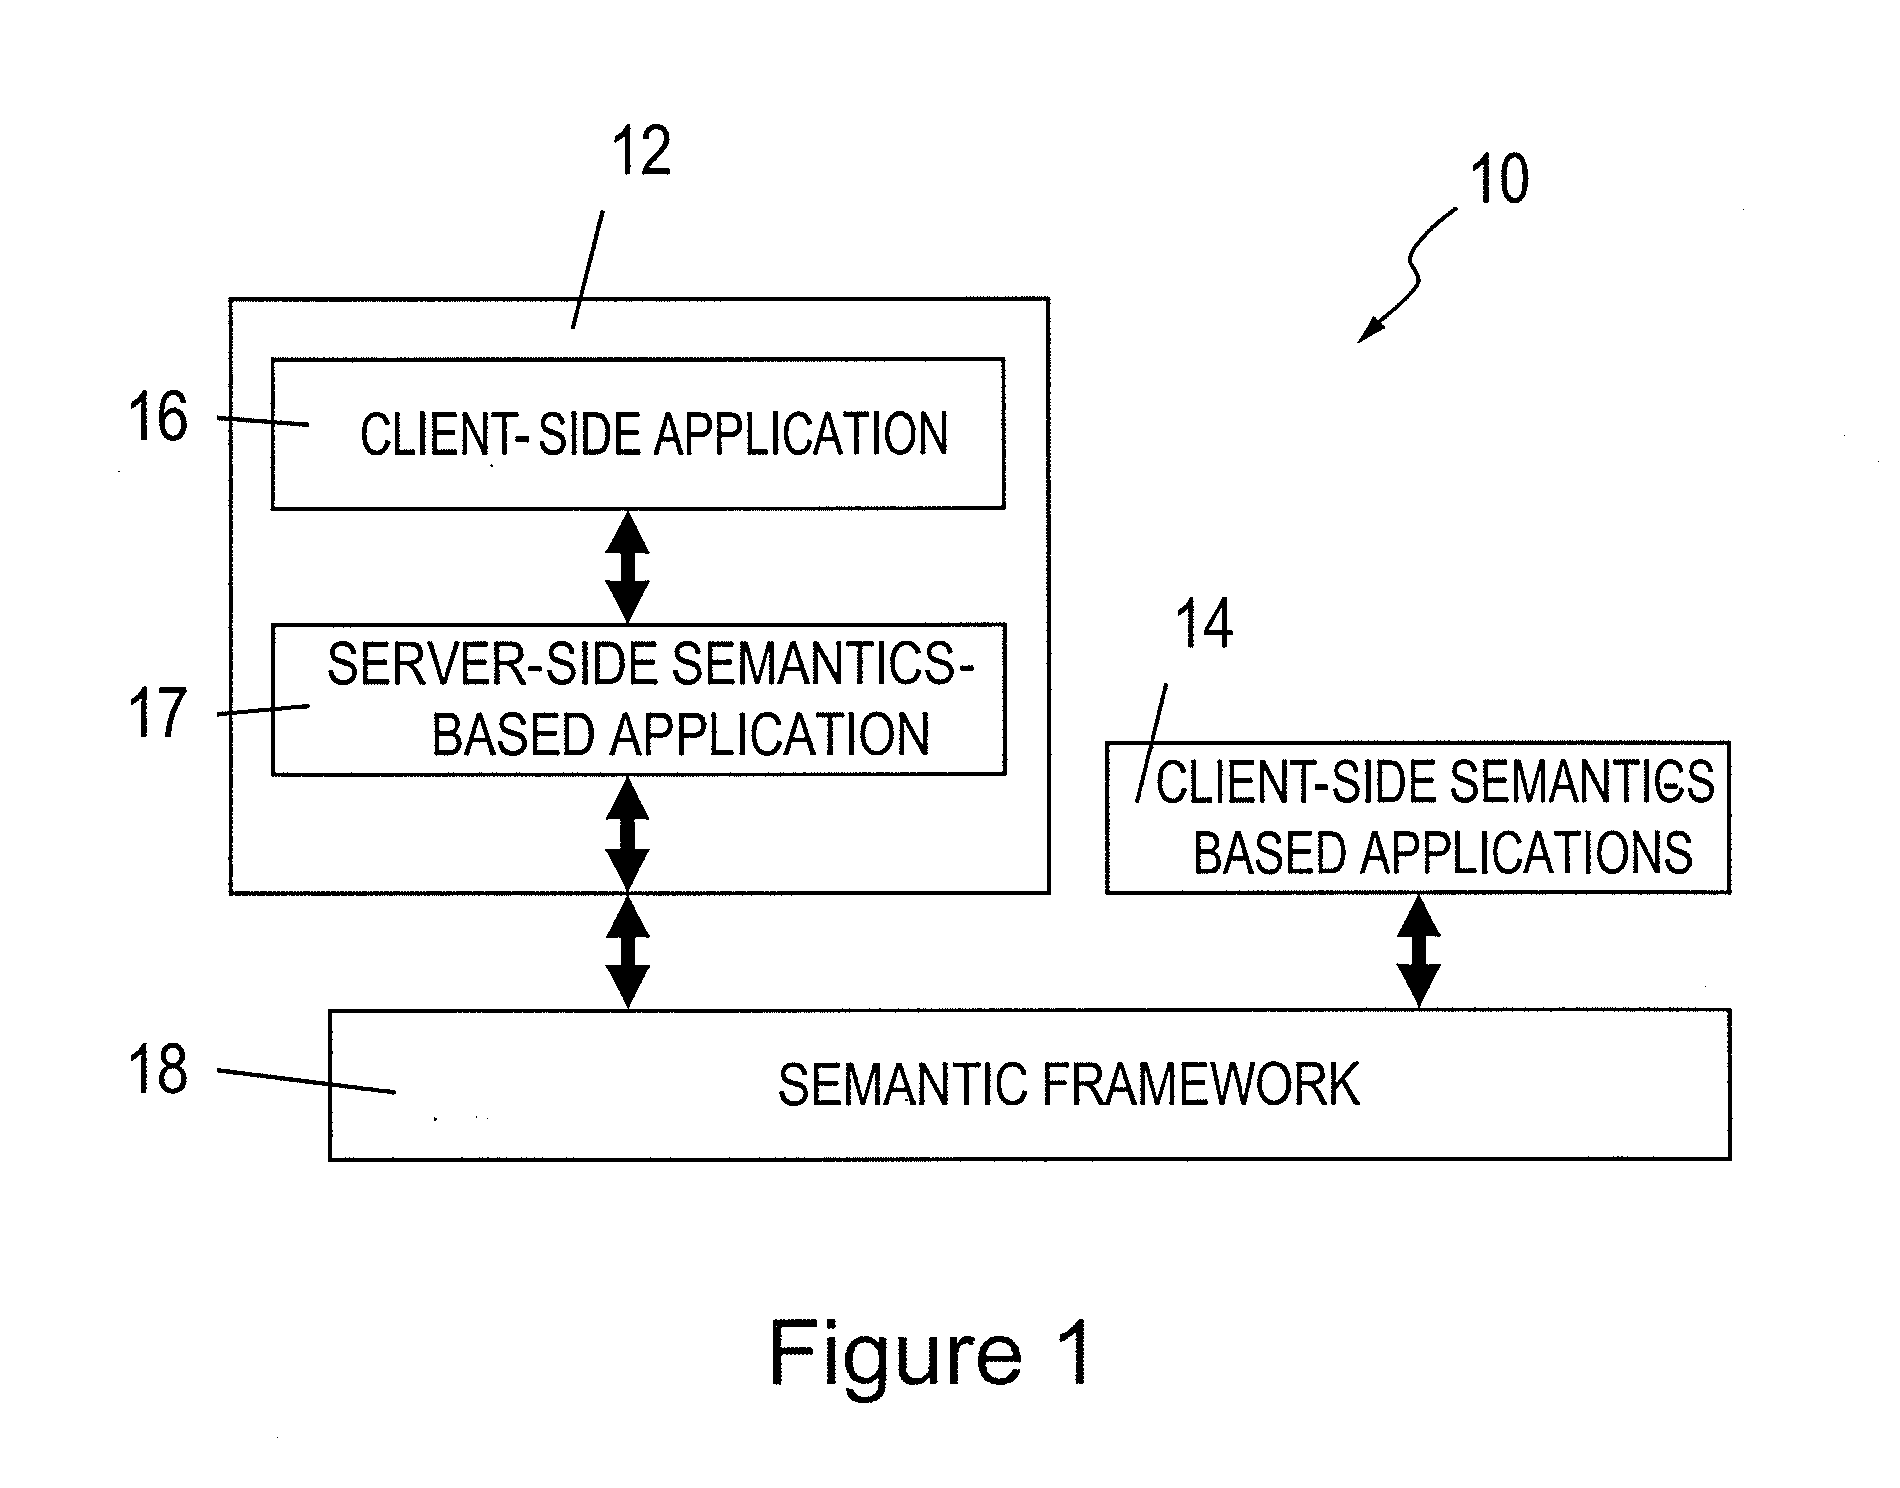 System for supporting coordination of resources for events in an organization